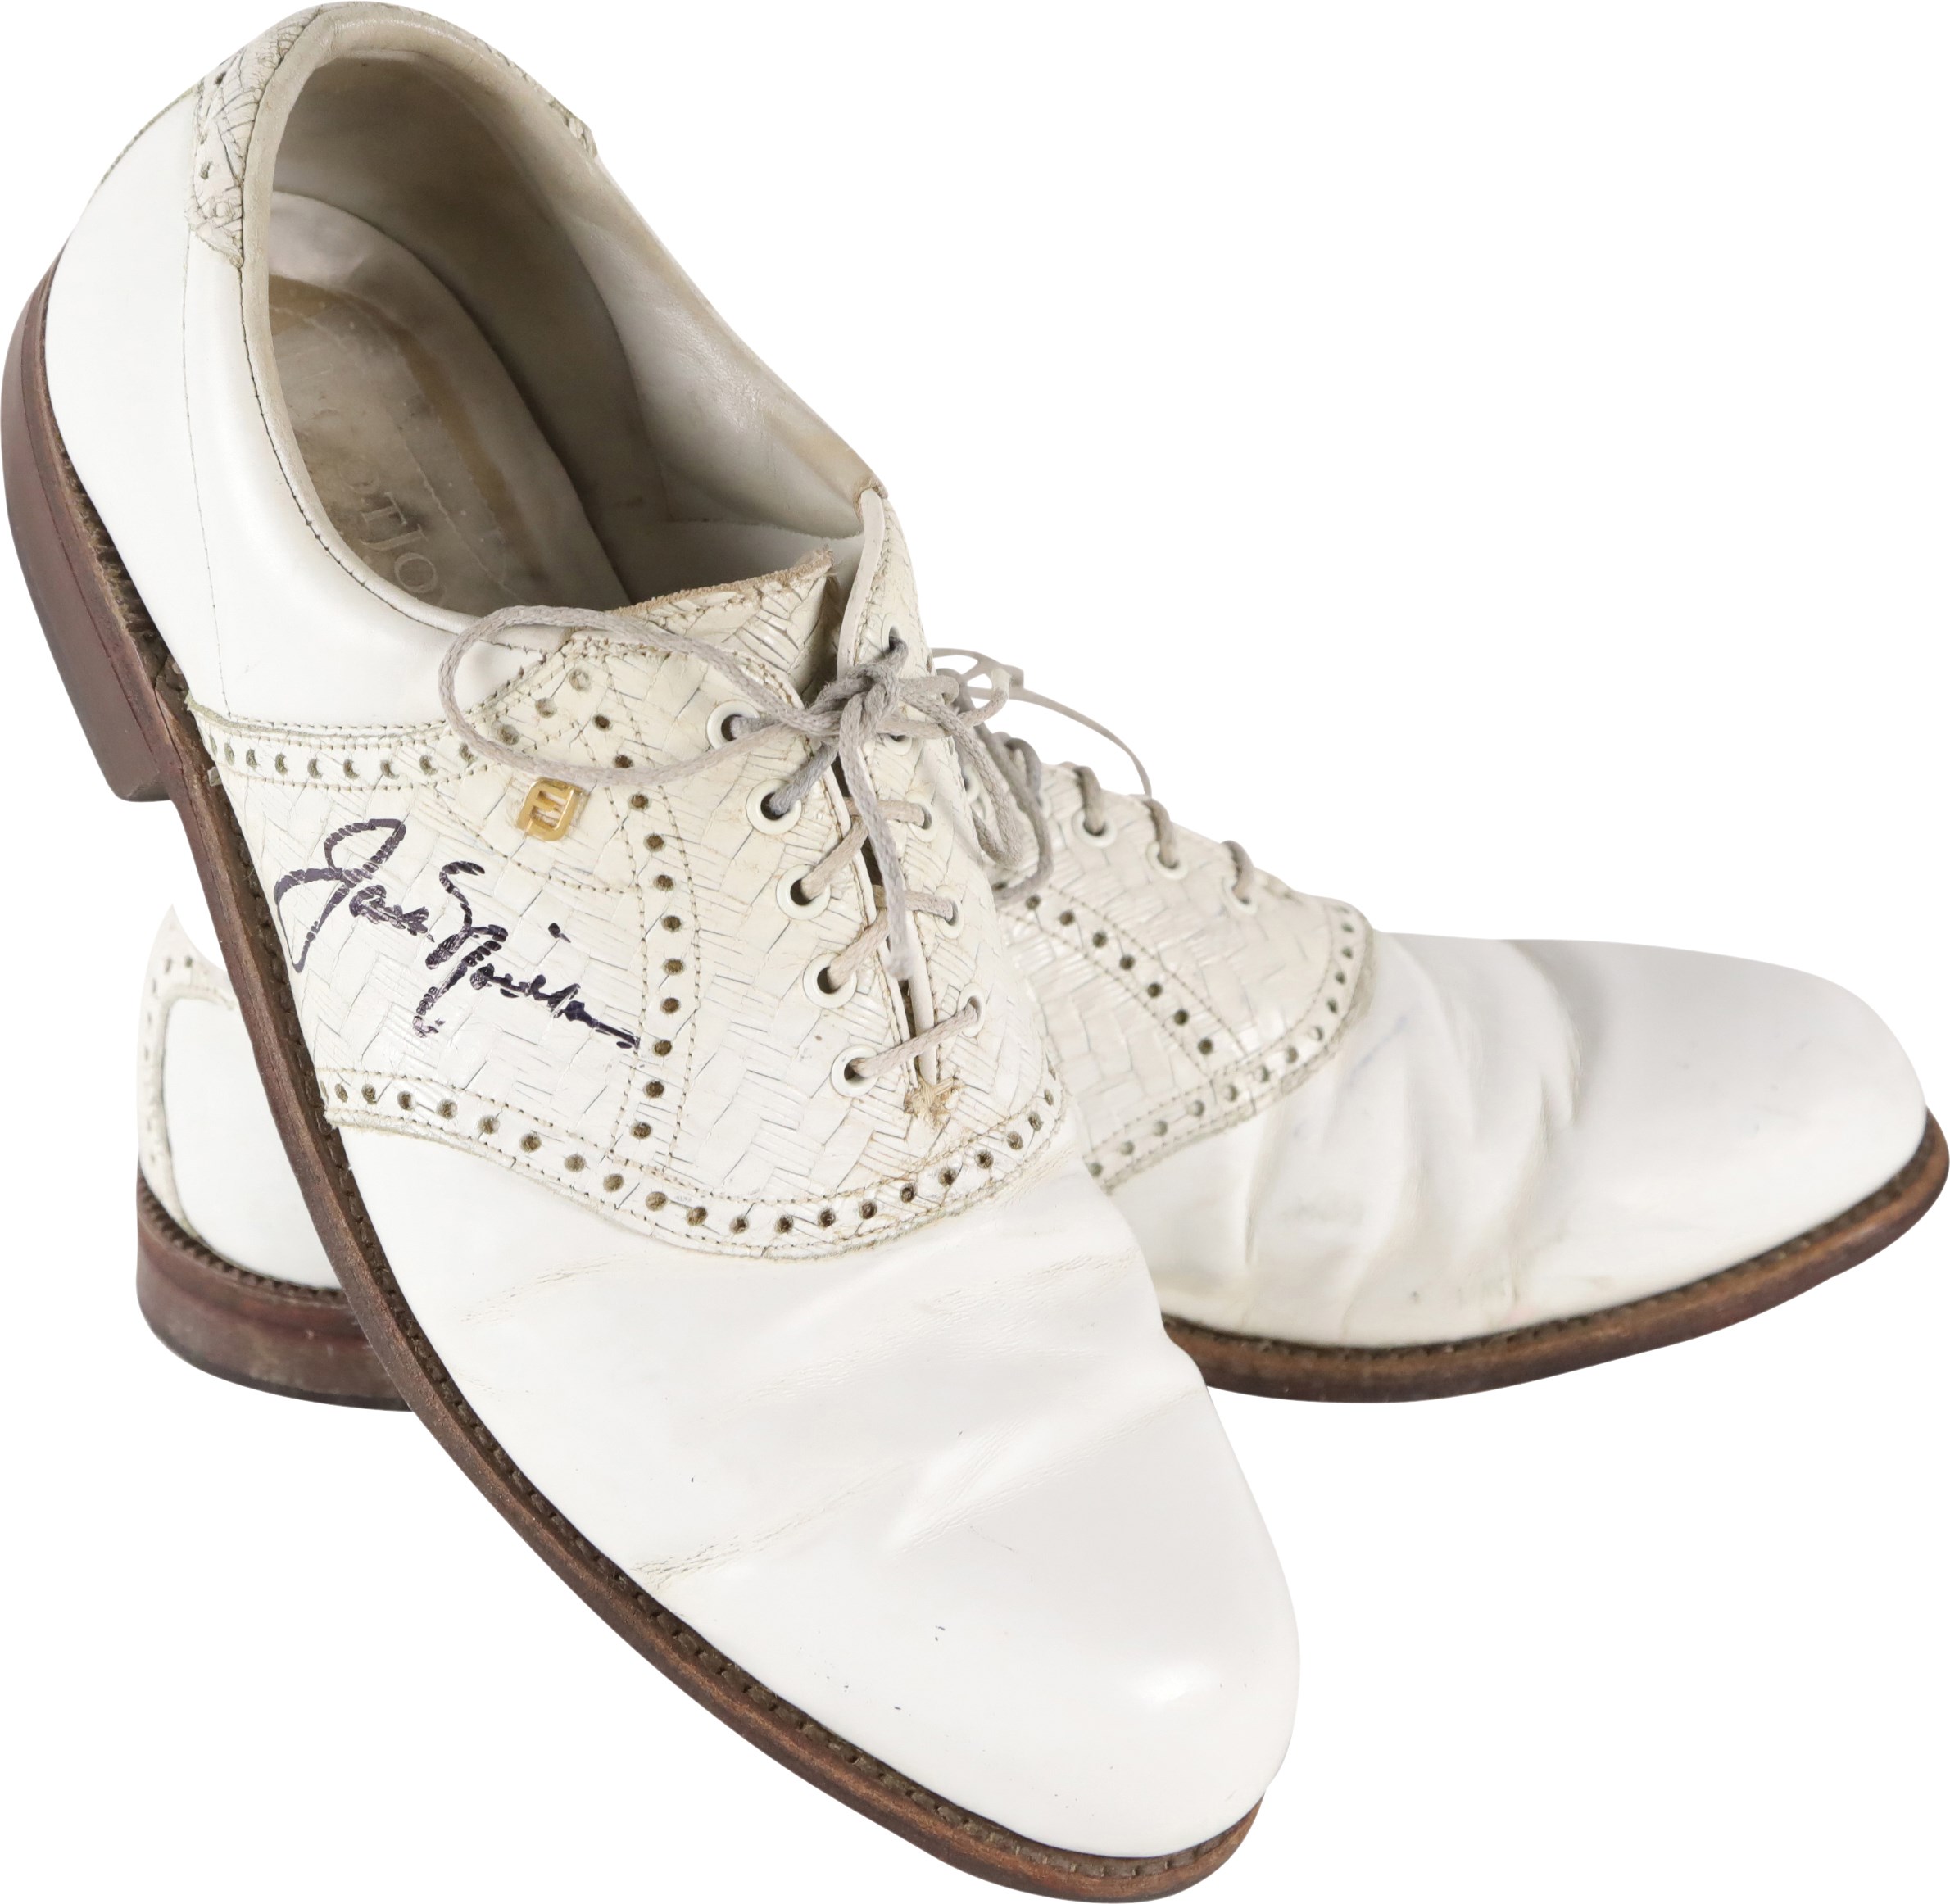 - Jack Nicklaus Signed Worn Golf Shoes from Round with George W. Bush